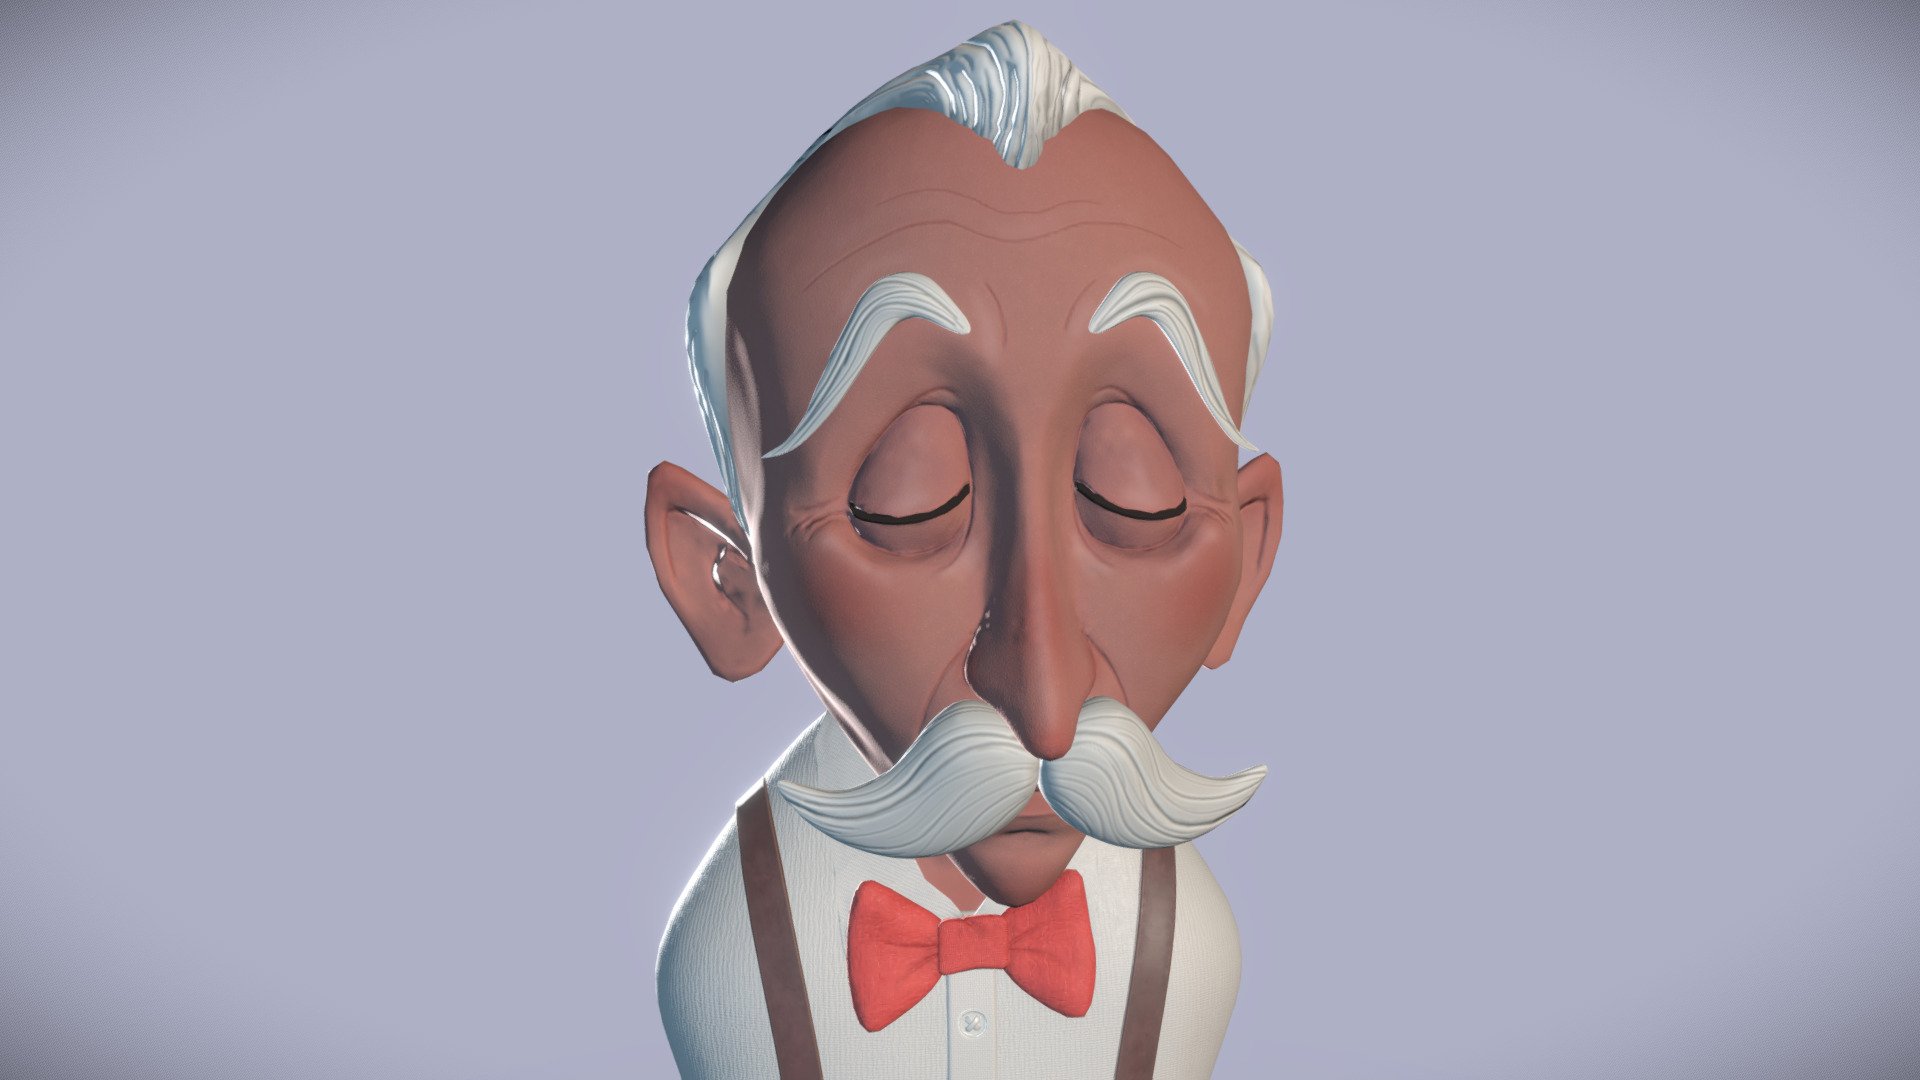 Another quick practice based on Luigi Lucarelli's face reference. 
https://www.artstation.com/artwork/8eE9zx
This time a little bit challenging, doing all the process, retopology, UVs, and textures in Substance too.
but, I enjoyed doing it so much!!❤️

I truly love Luigi's work and it inspires me to practice more and more!
Check out his art if you don't know about him ❤️.

This is my ArtStation if you want to see more of the process ❤️🥰
https://www.artstation.com/artwork/zPwkOL - Red bow tie Grandpa - Luigi Lucarelli - 3D model by KyaraIchigo 3d model